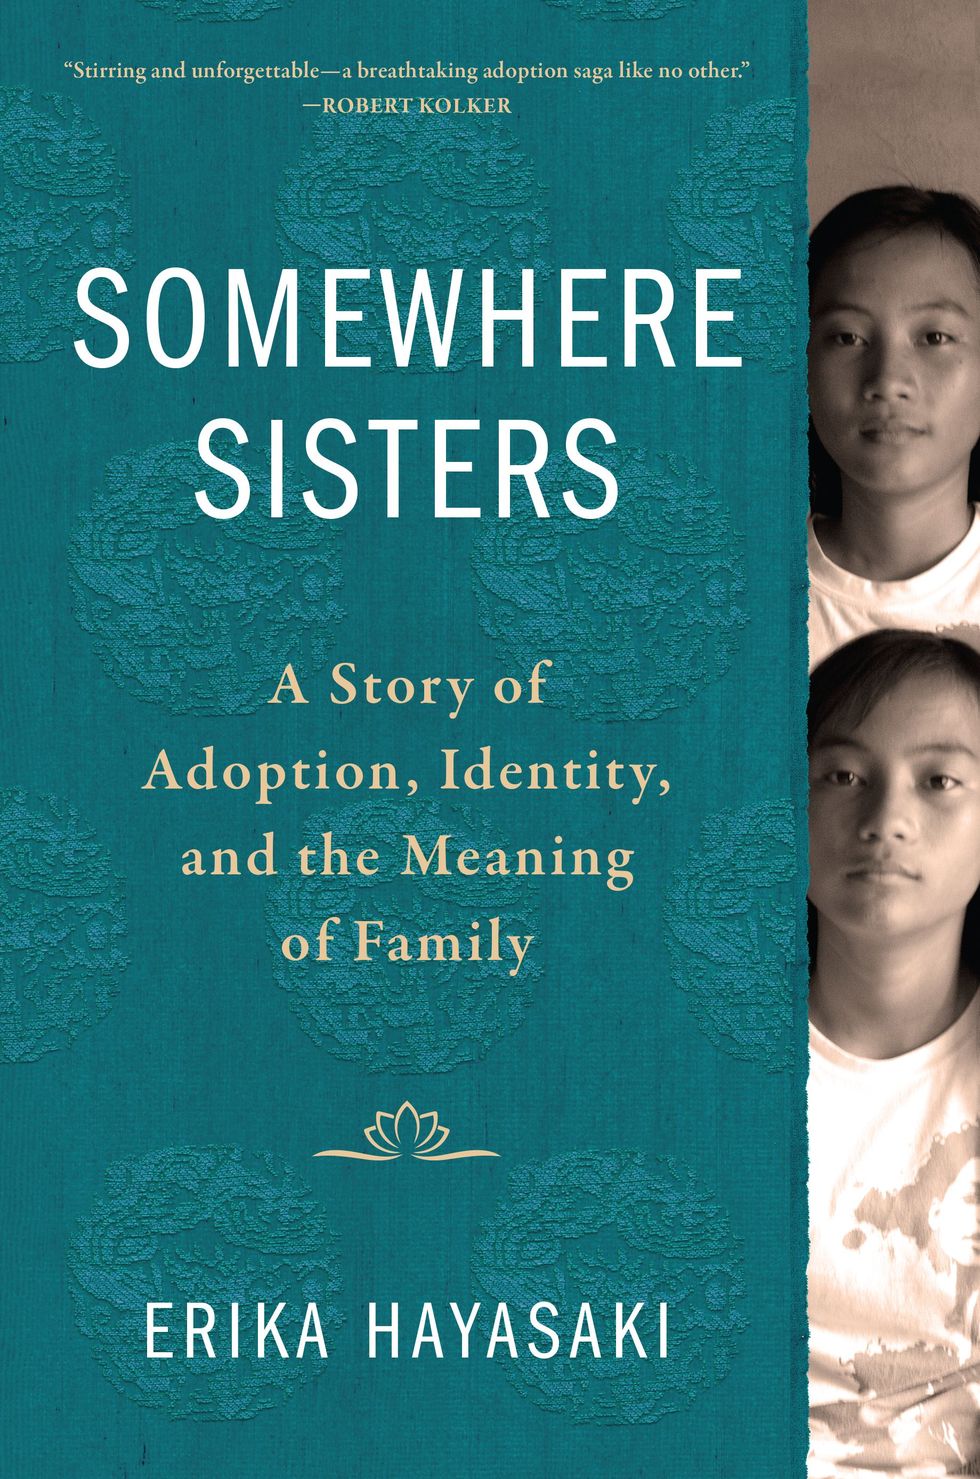 Somewhere Sisters: A Story of Adoption, Identity, and the Meaning of Family